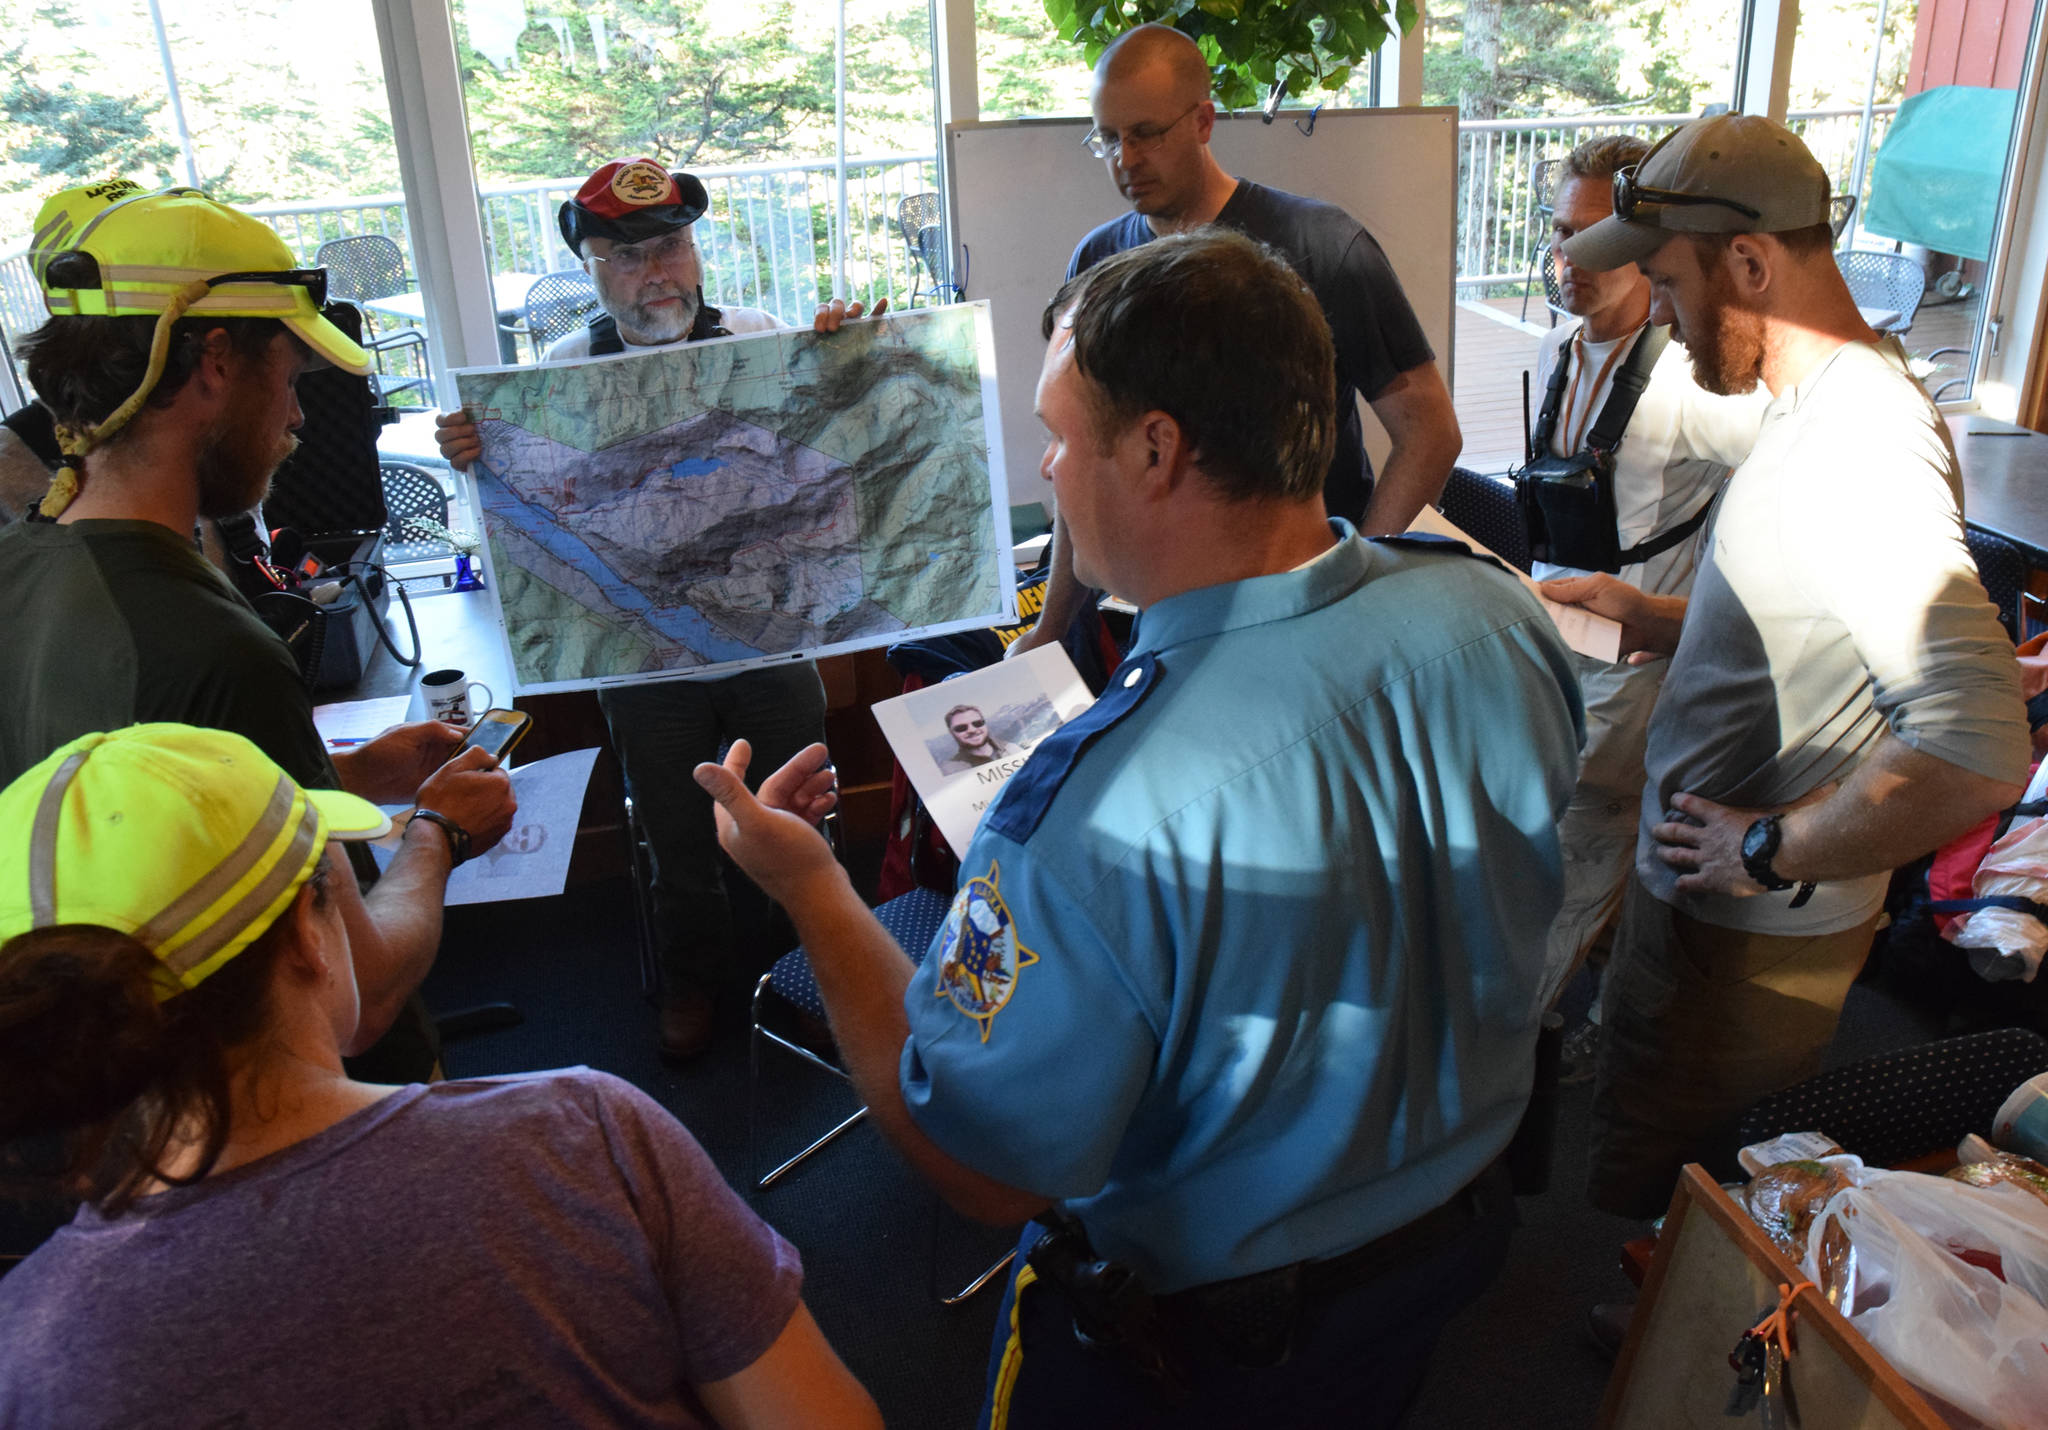 Alaska State Trooper Joshua Bentz briefs members of Juneau Mountain Rescue and SEADOGS Sunday, July 5, 2015 during the search for missing hiker Michael Blaisdell. (Michael Penn | Juneau Empire)